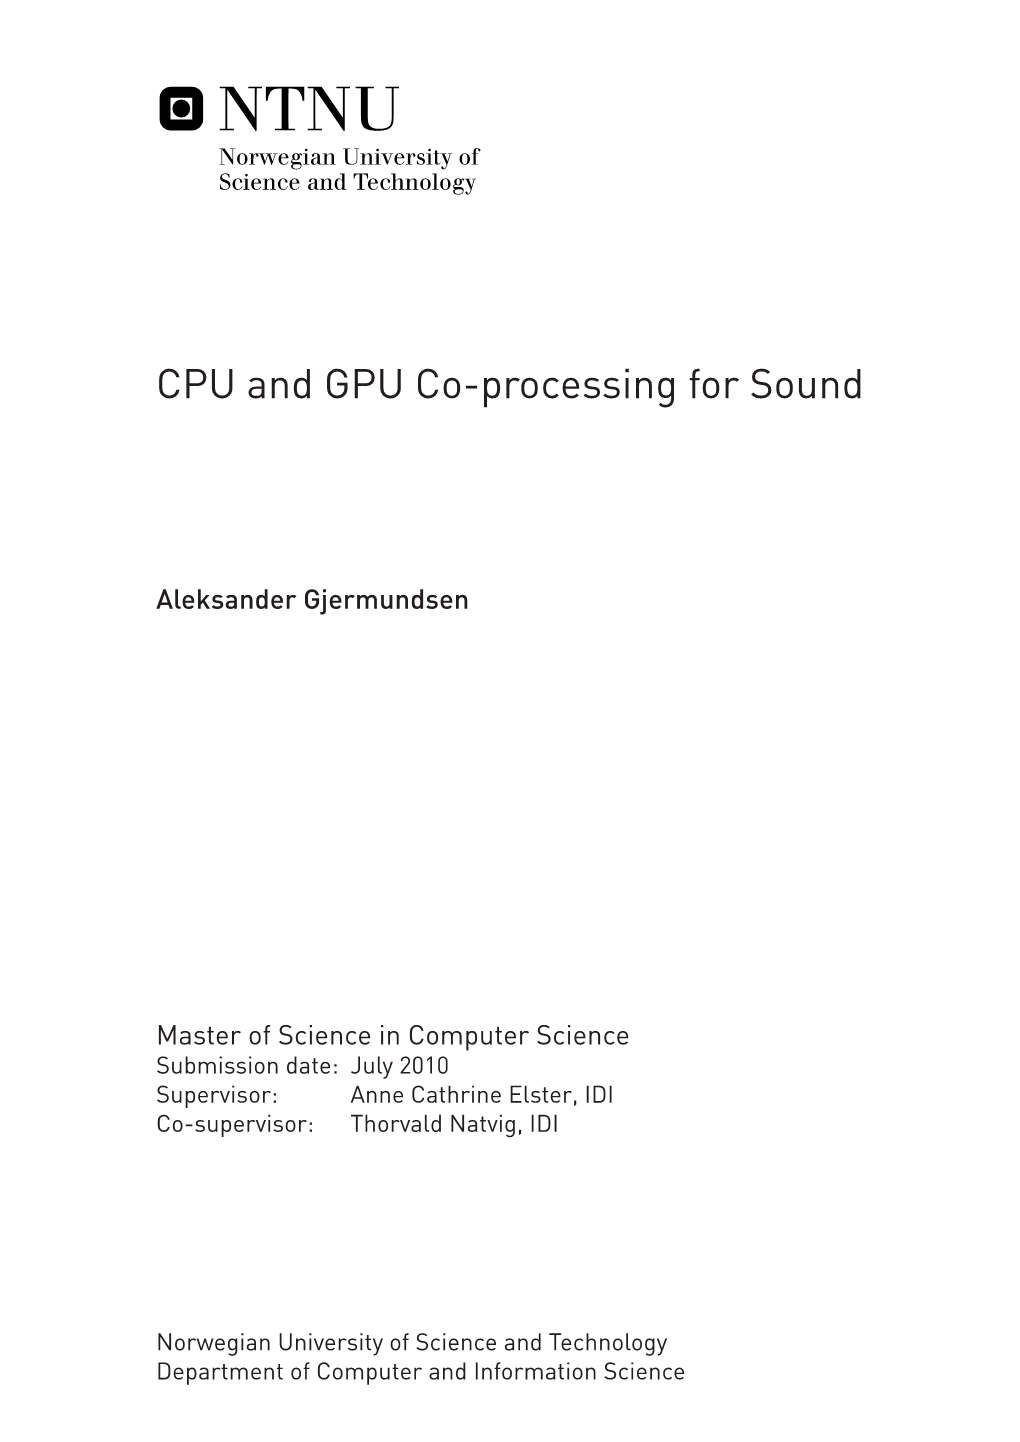 CPU and GPU Co-Processing for Sound